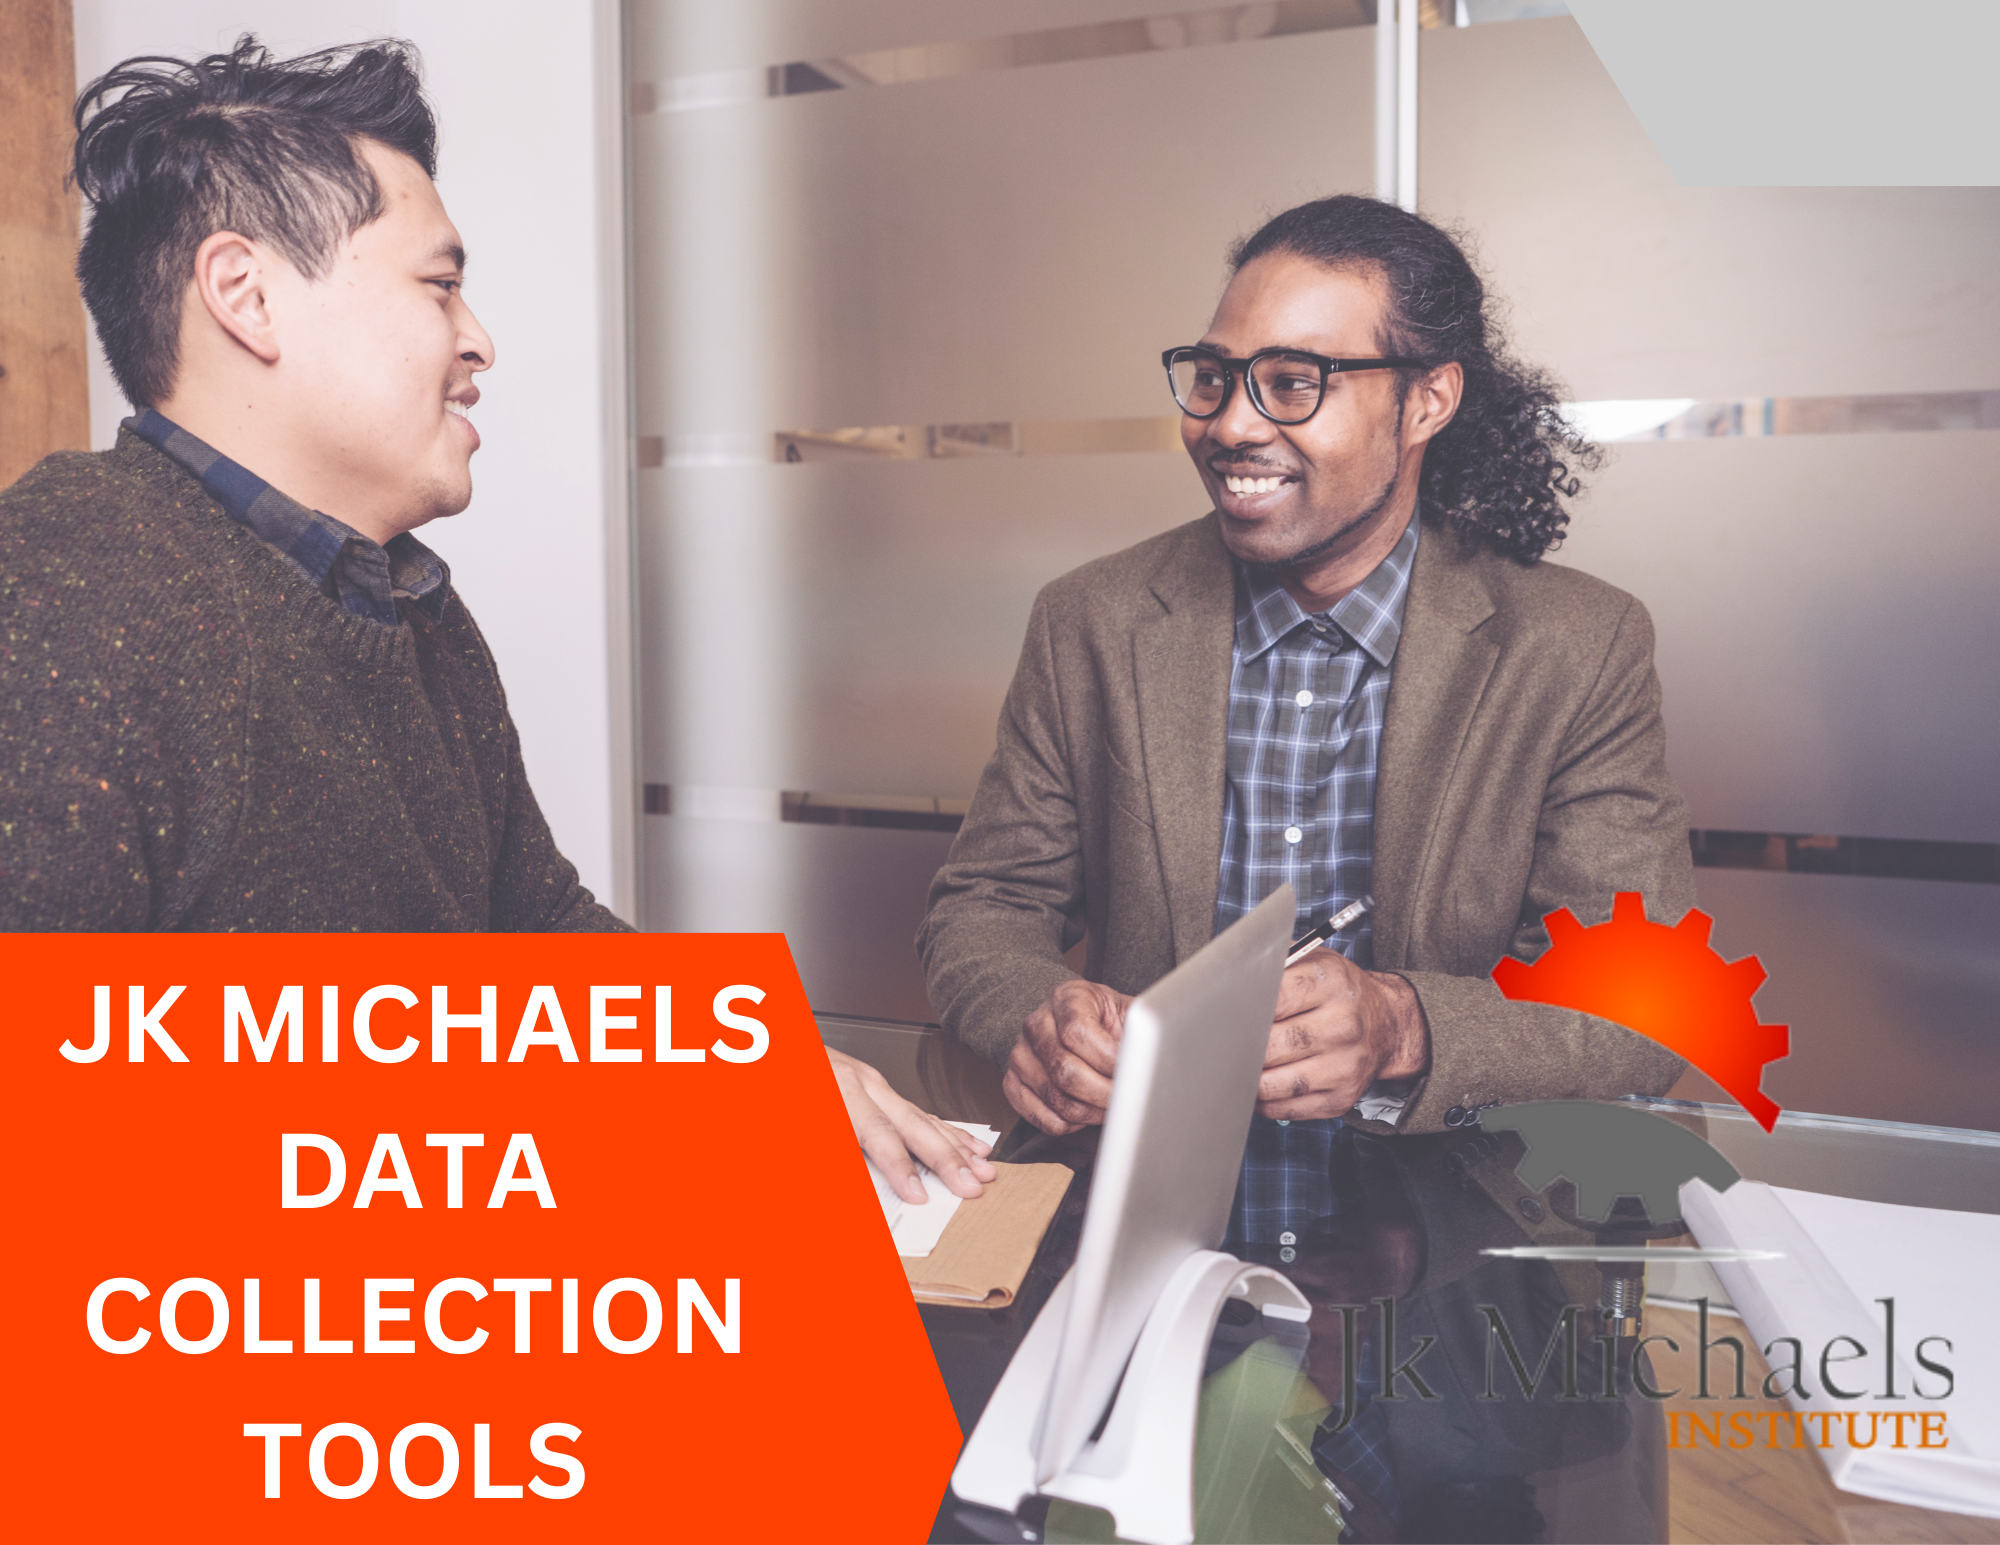 DATA COLLECTION TOOLS